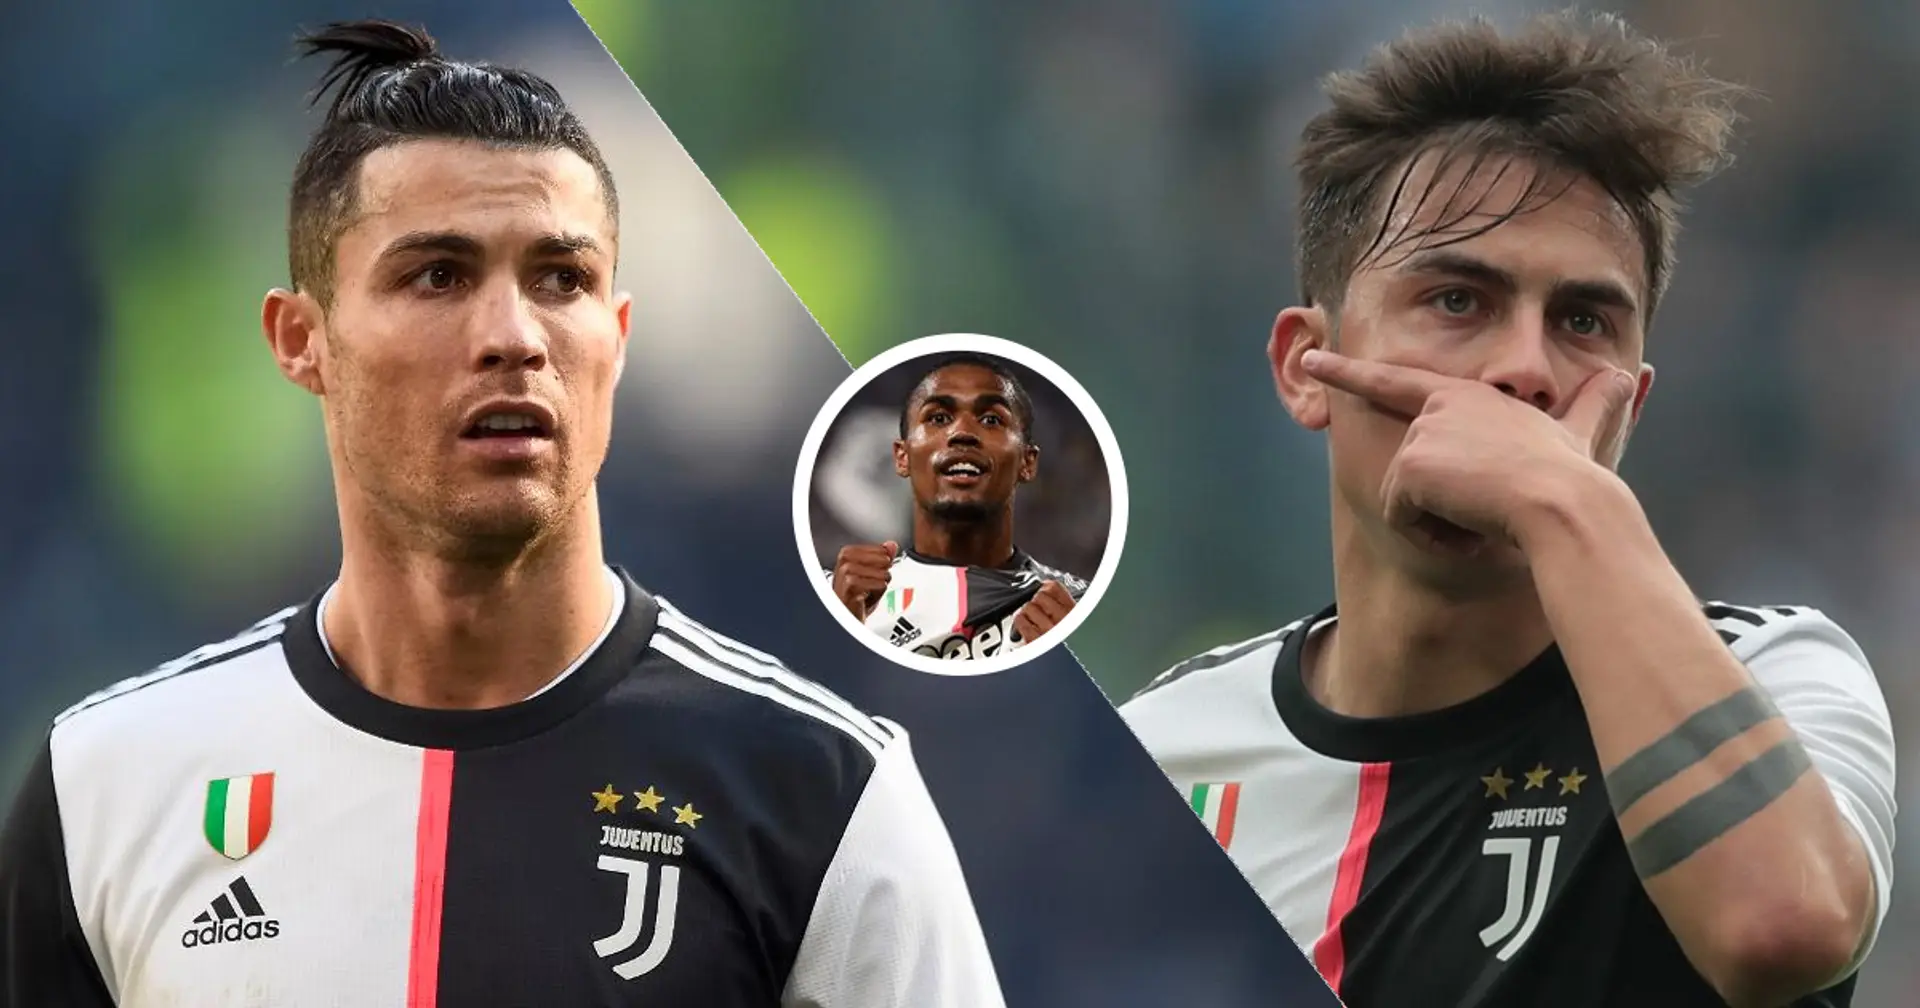 Best in the world? Not even the best in his club! – Douglas Costa picks Dybala over Ronaldo